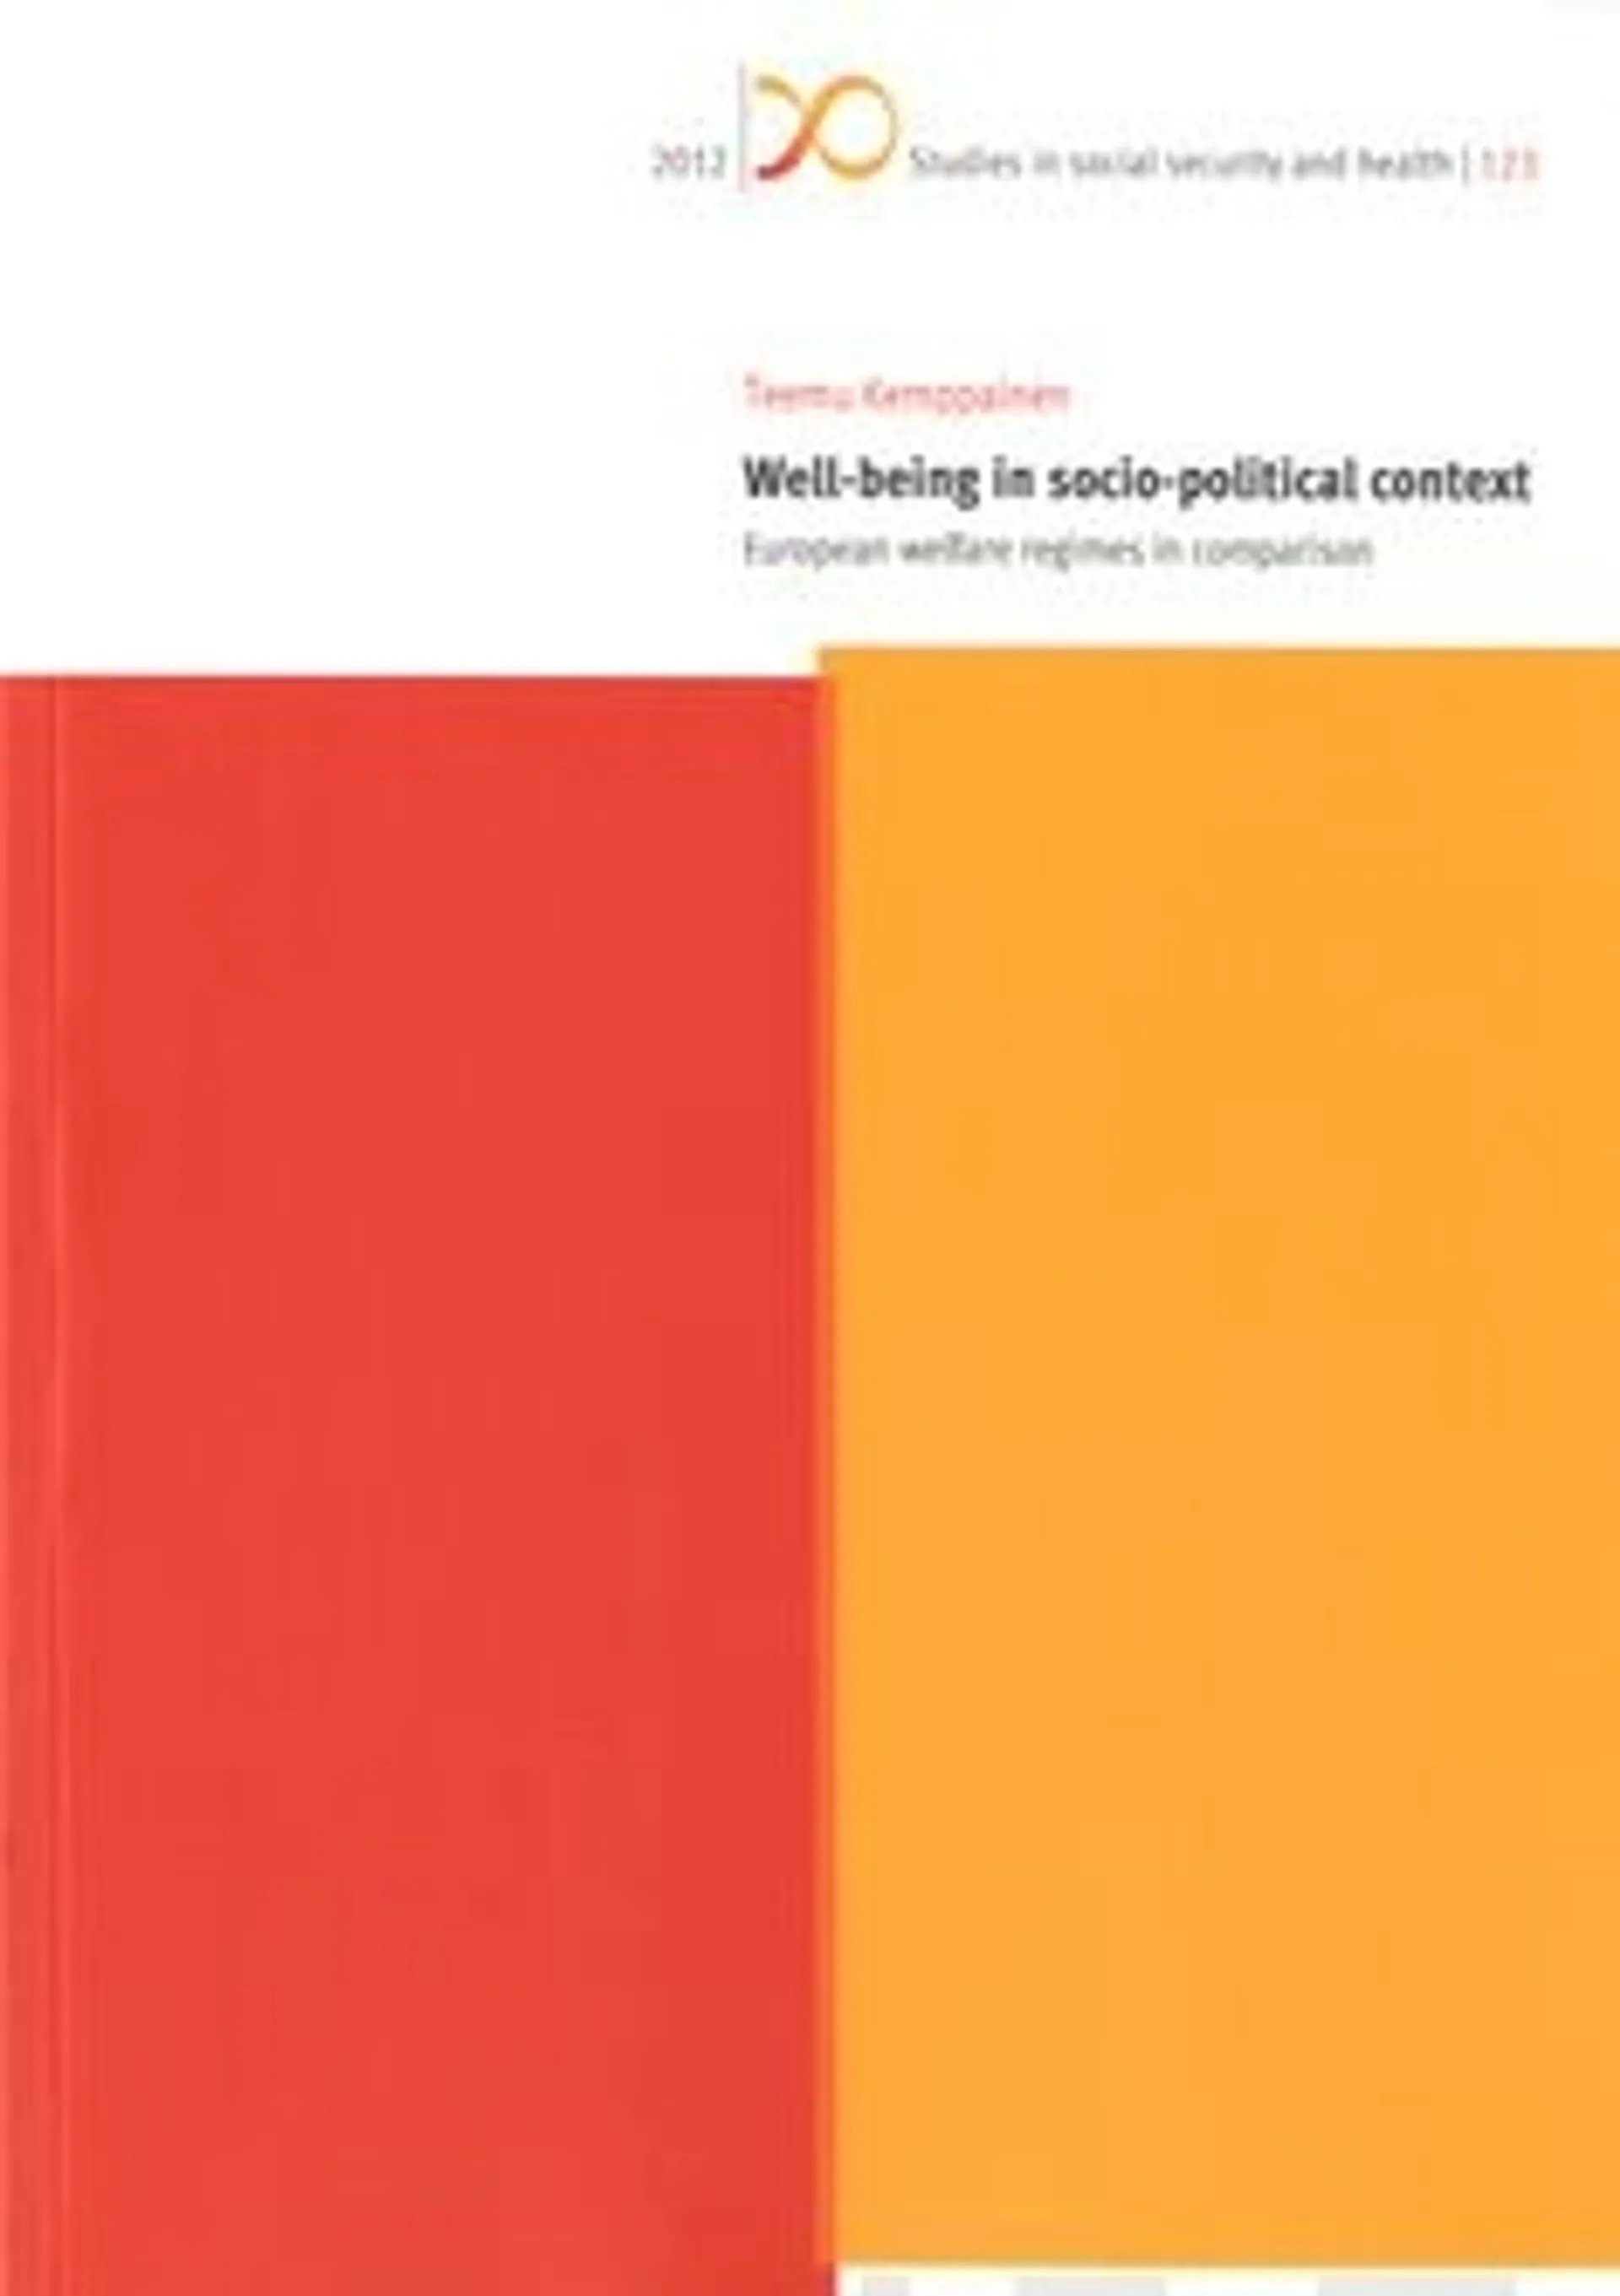 Kemppainen, Well-being in socio-political context